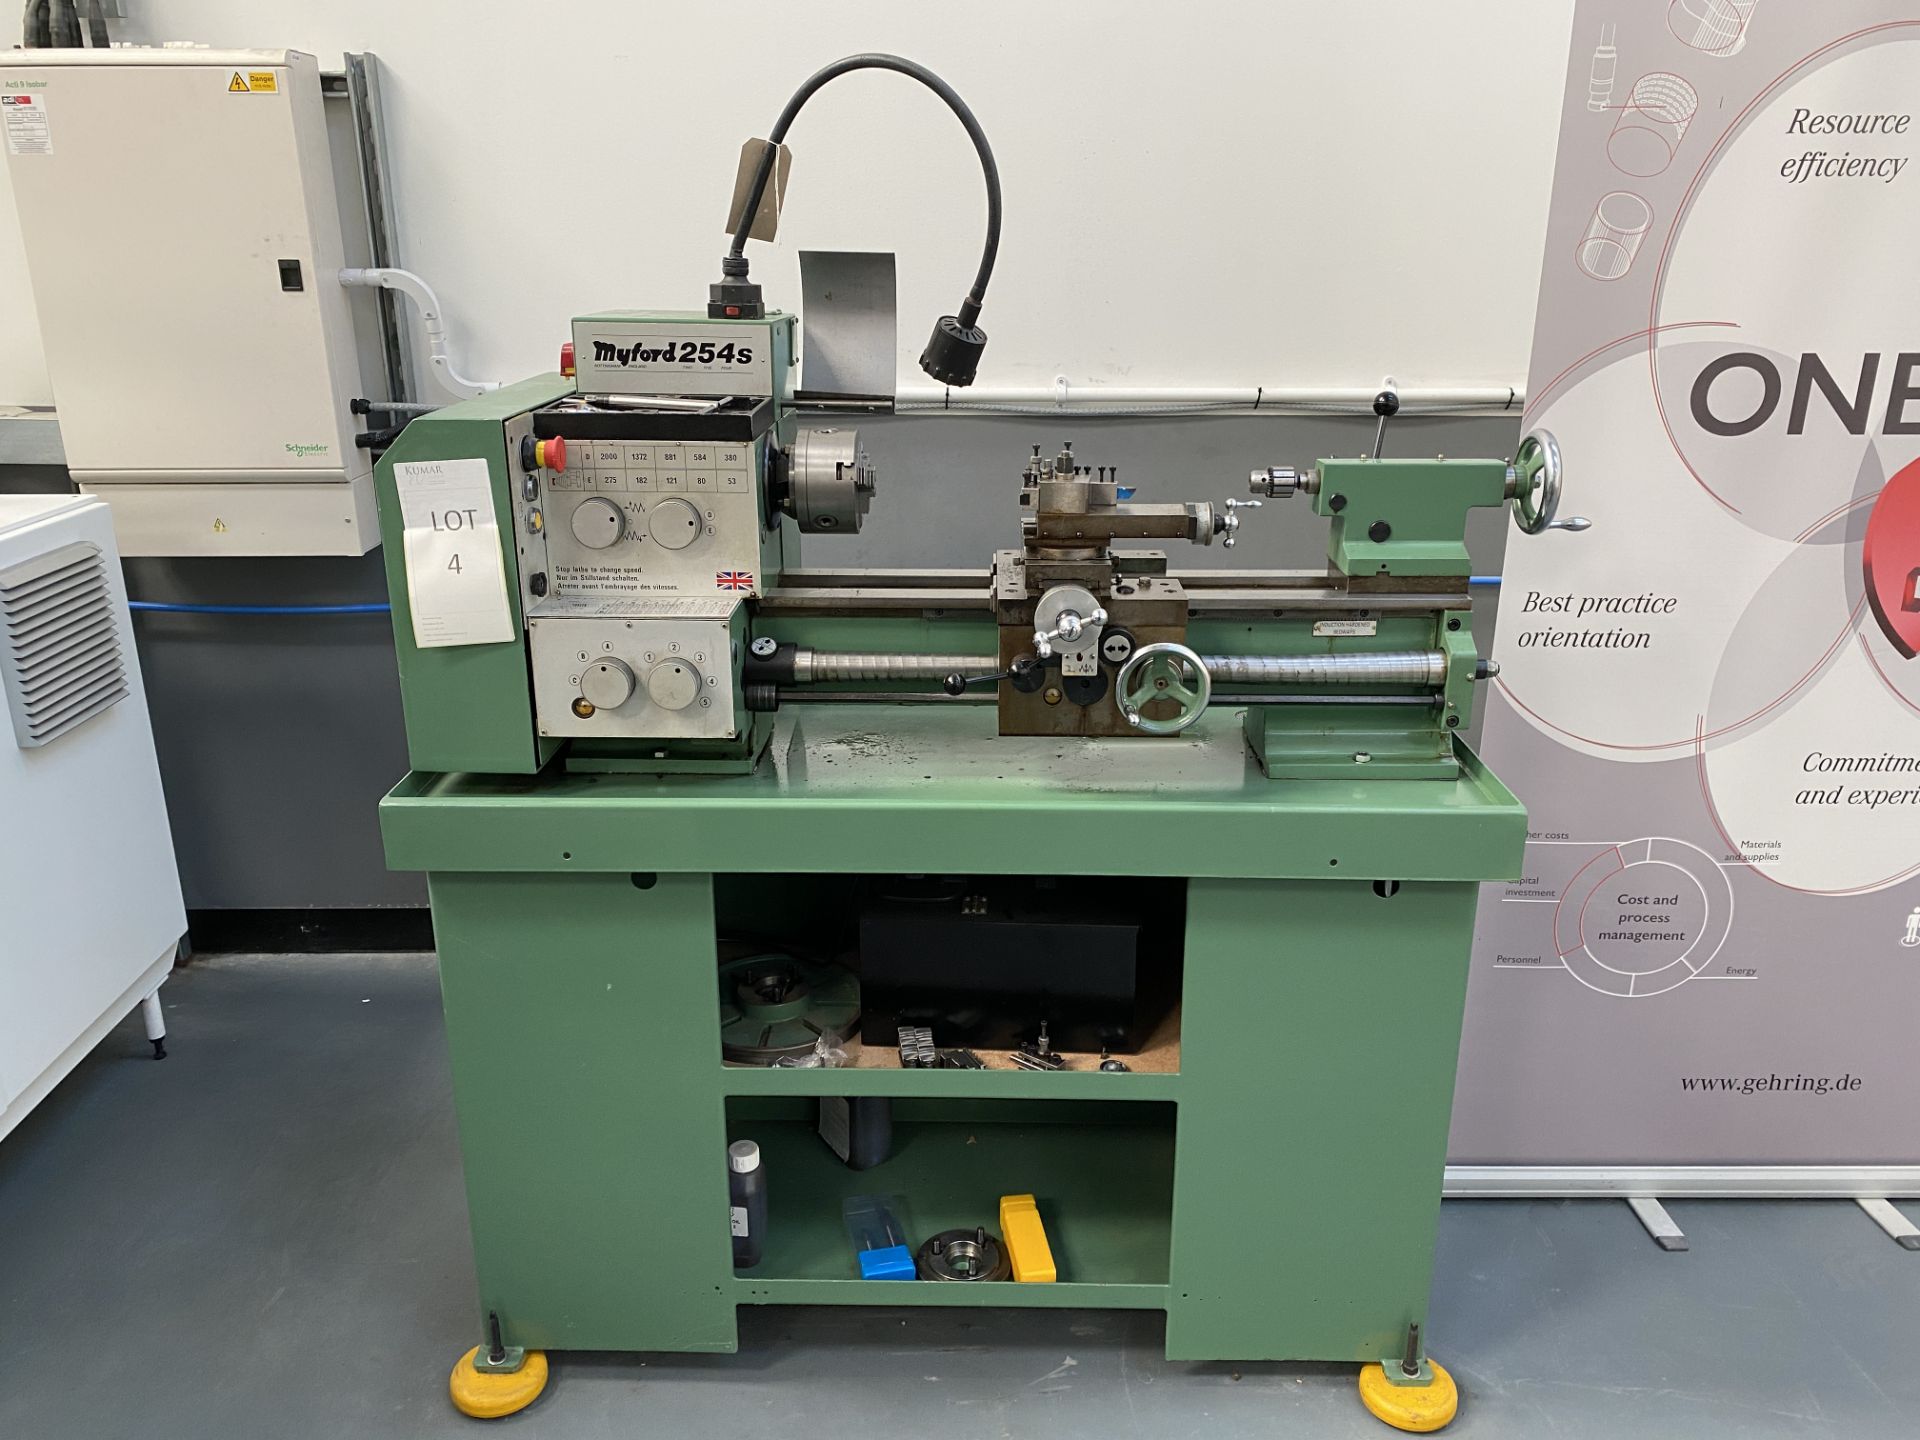 Myford 254s Hobby Lathe, Serial No. ZS164056 EIC with Powercross & Longitudinal Feeds with Tooling